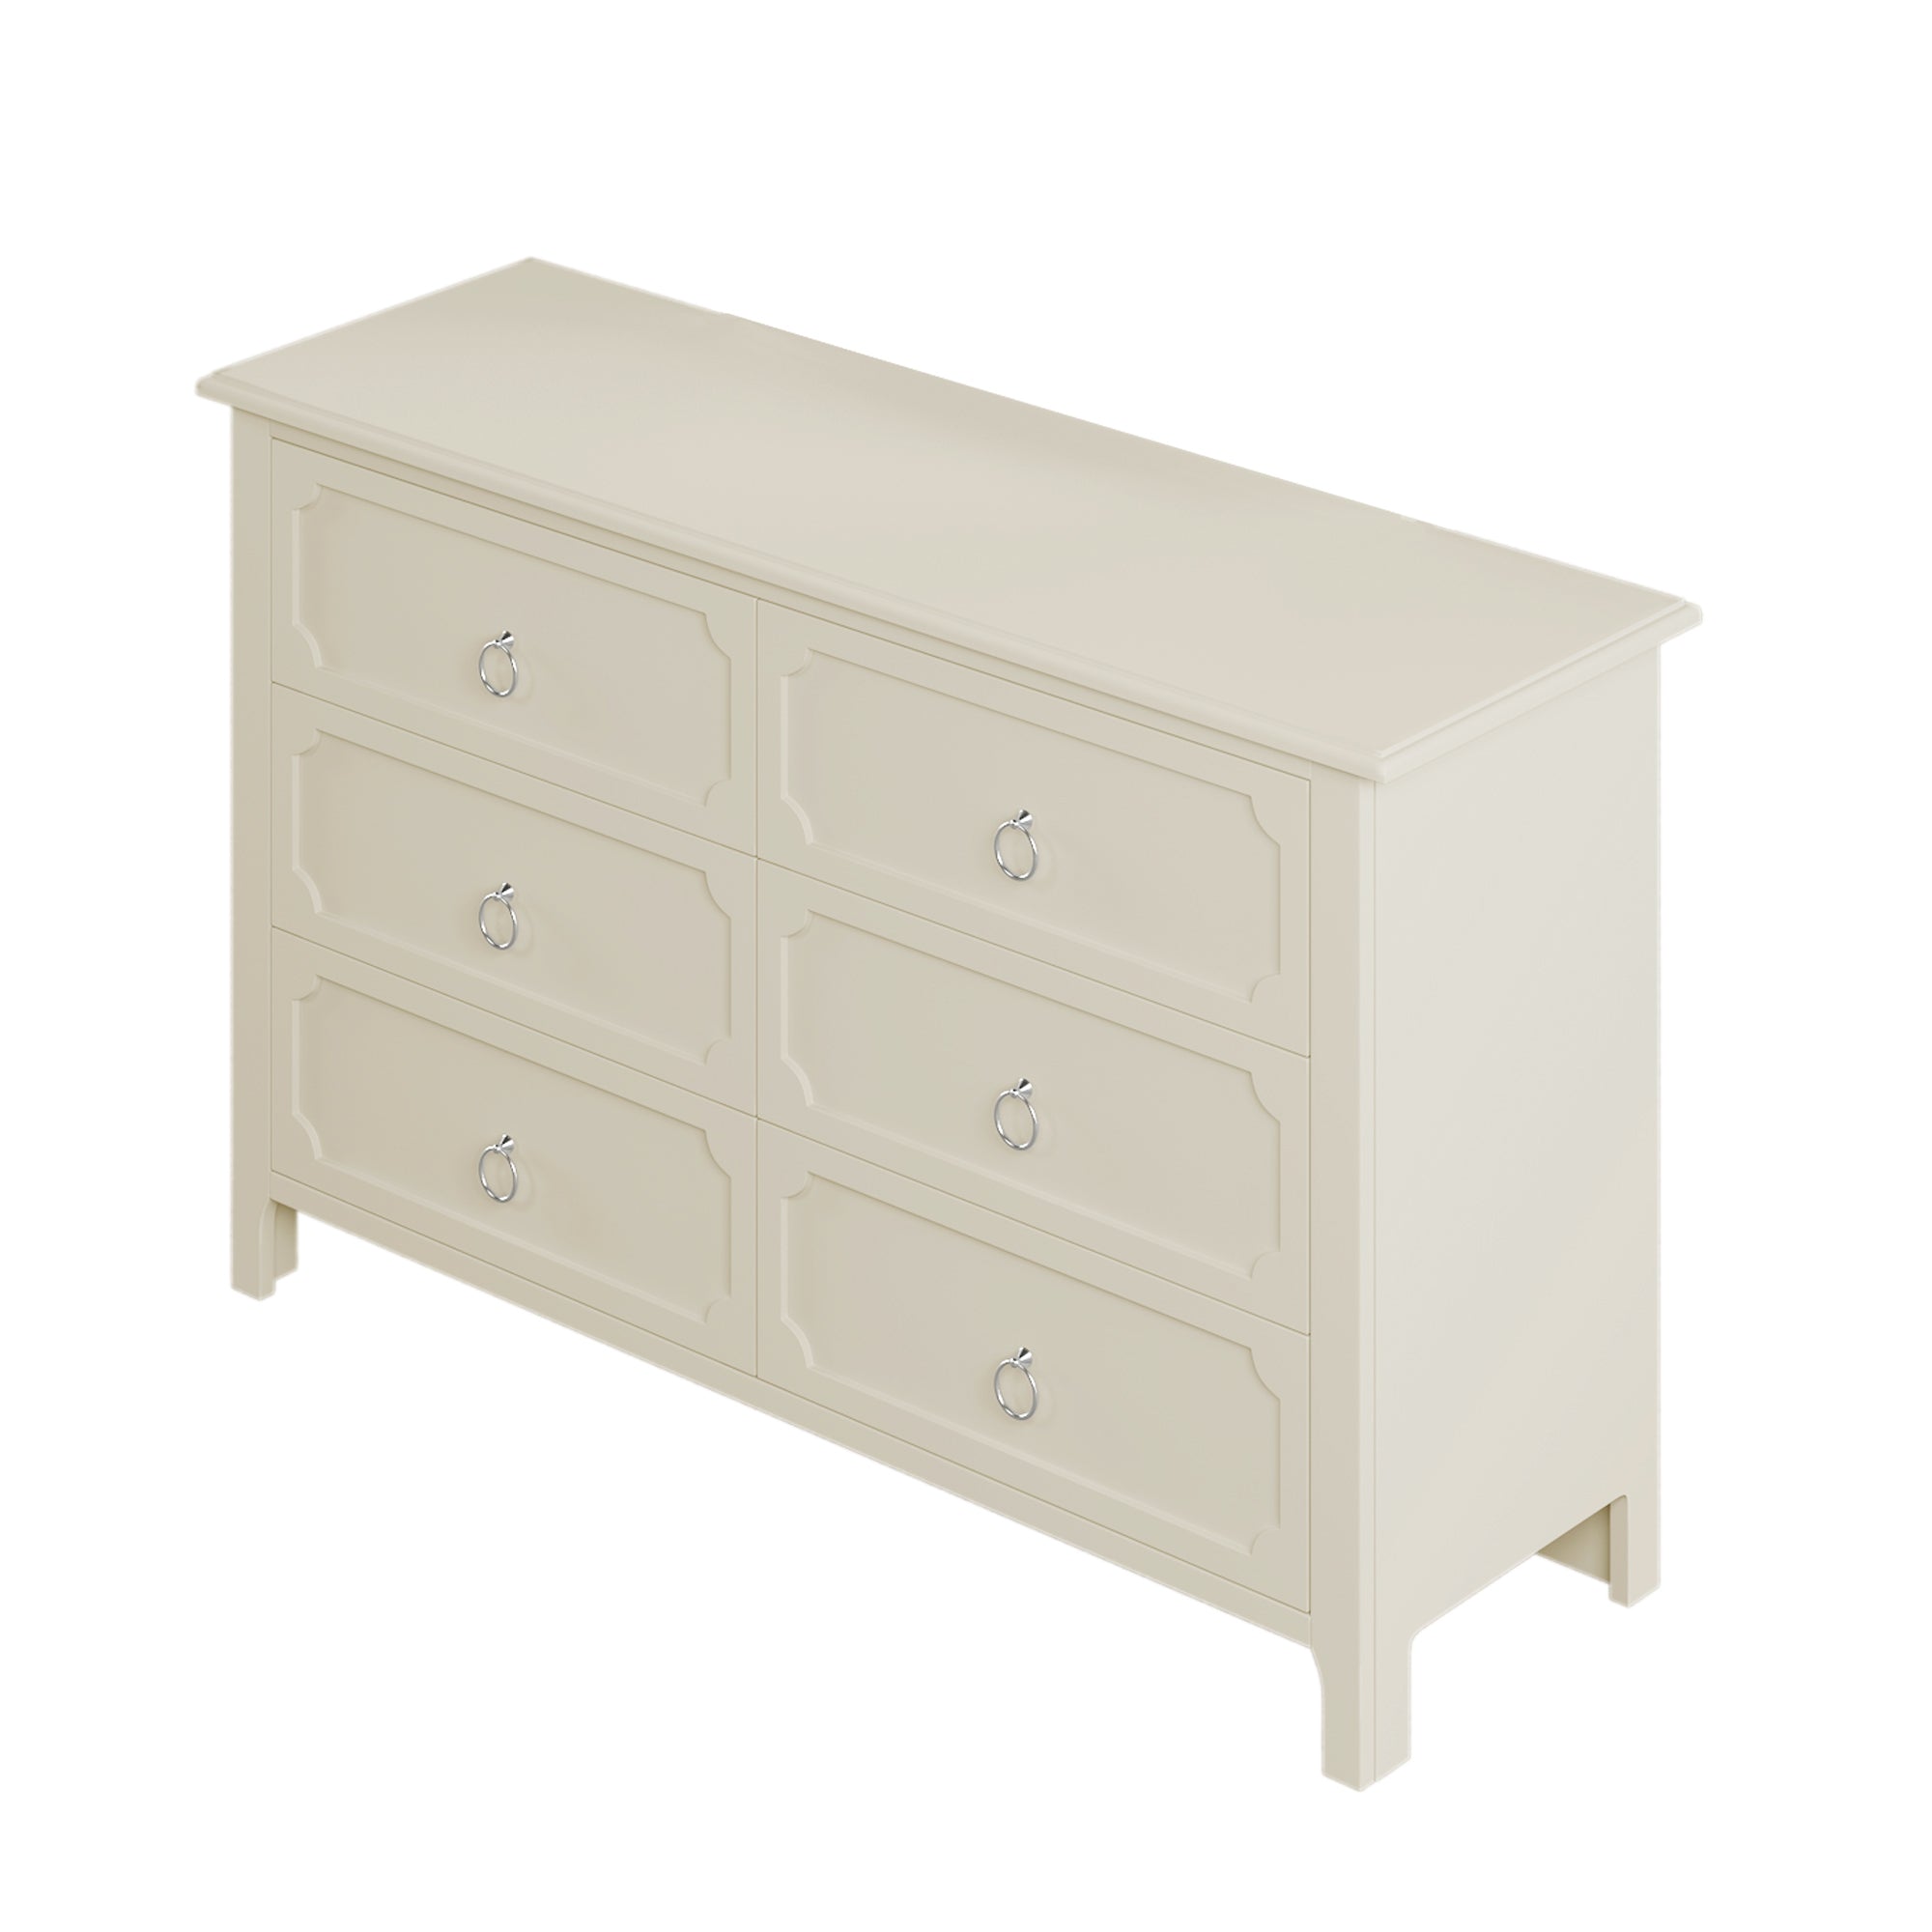 Milky Rubber Wooden Dresser 6 Large Drawers Silver Metal Handles - White